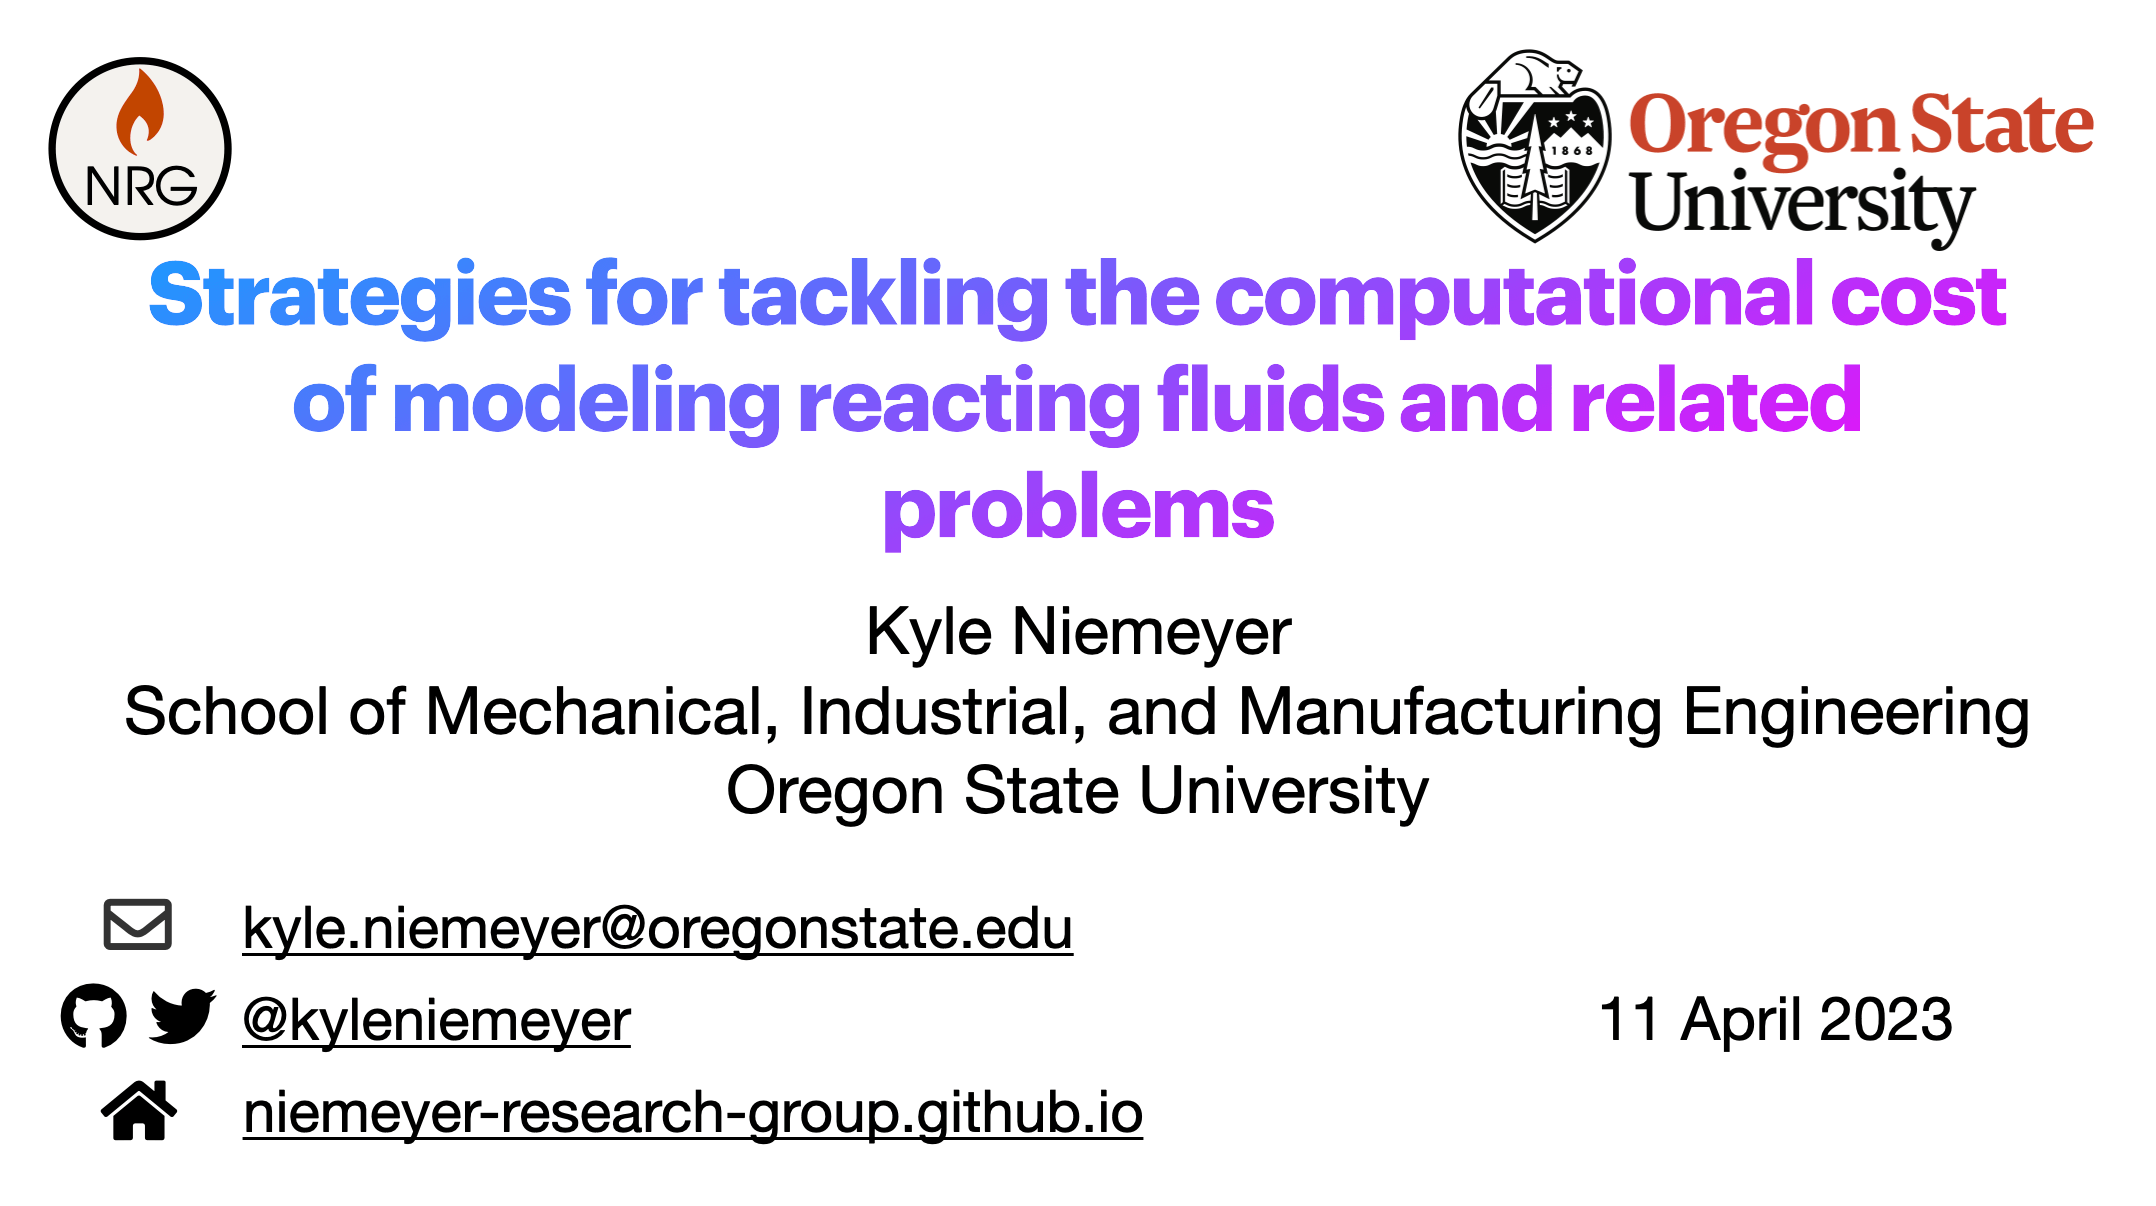 Title slide of the talk, which says 'Strategies for tackling the computational cost of modeling reacting fluids and related problems'.